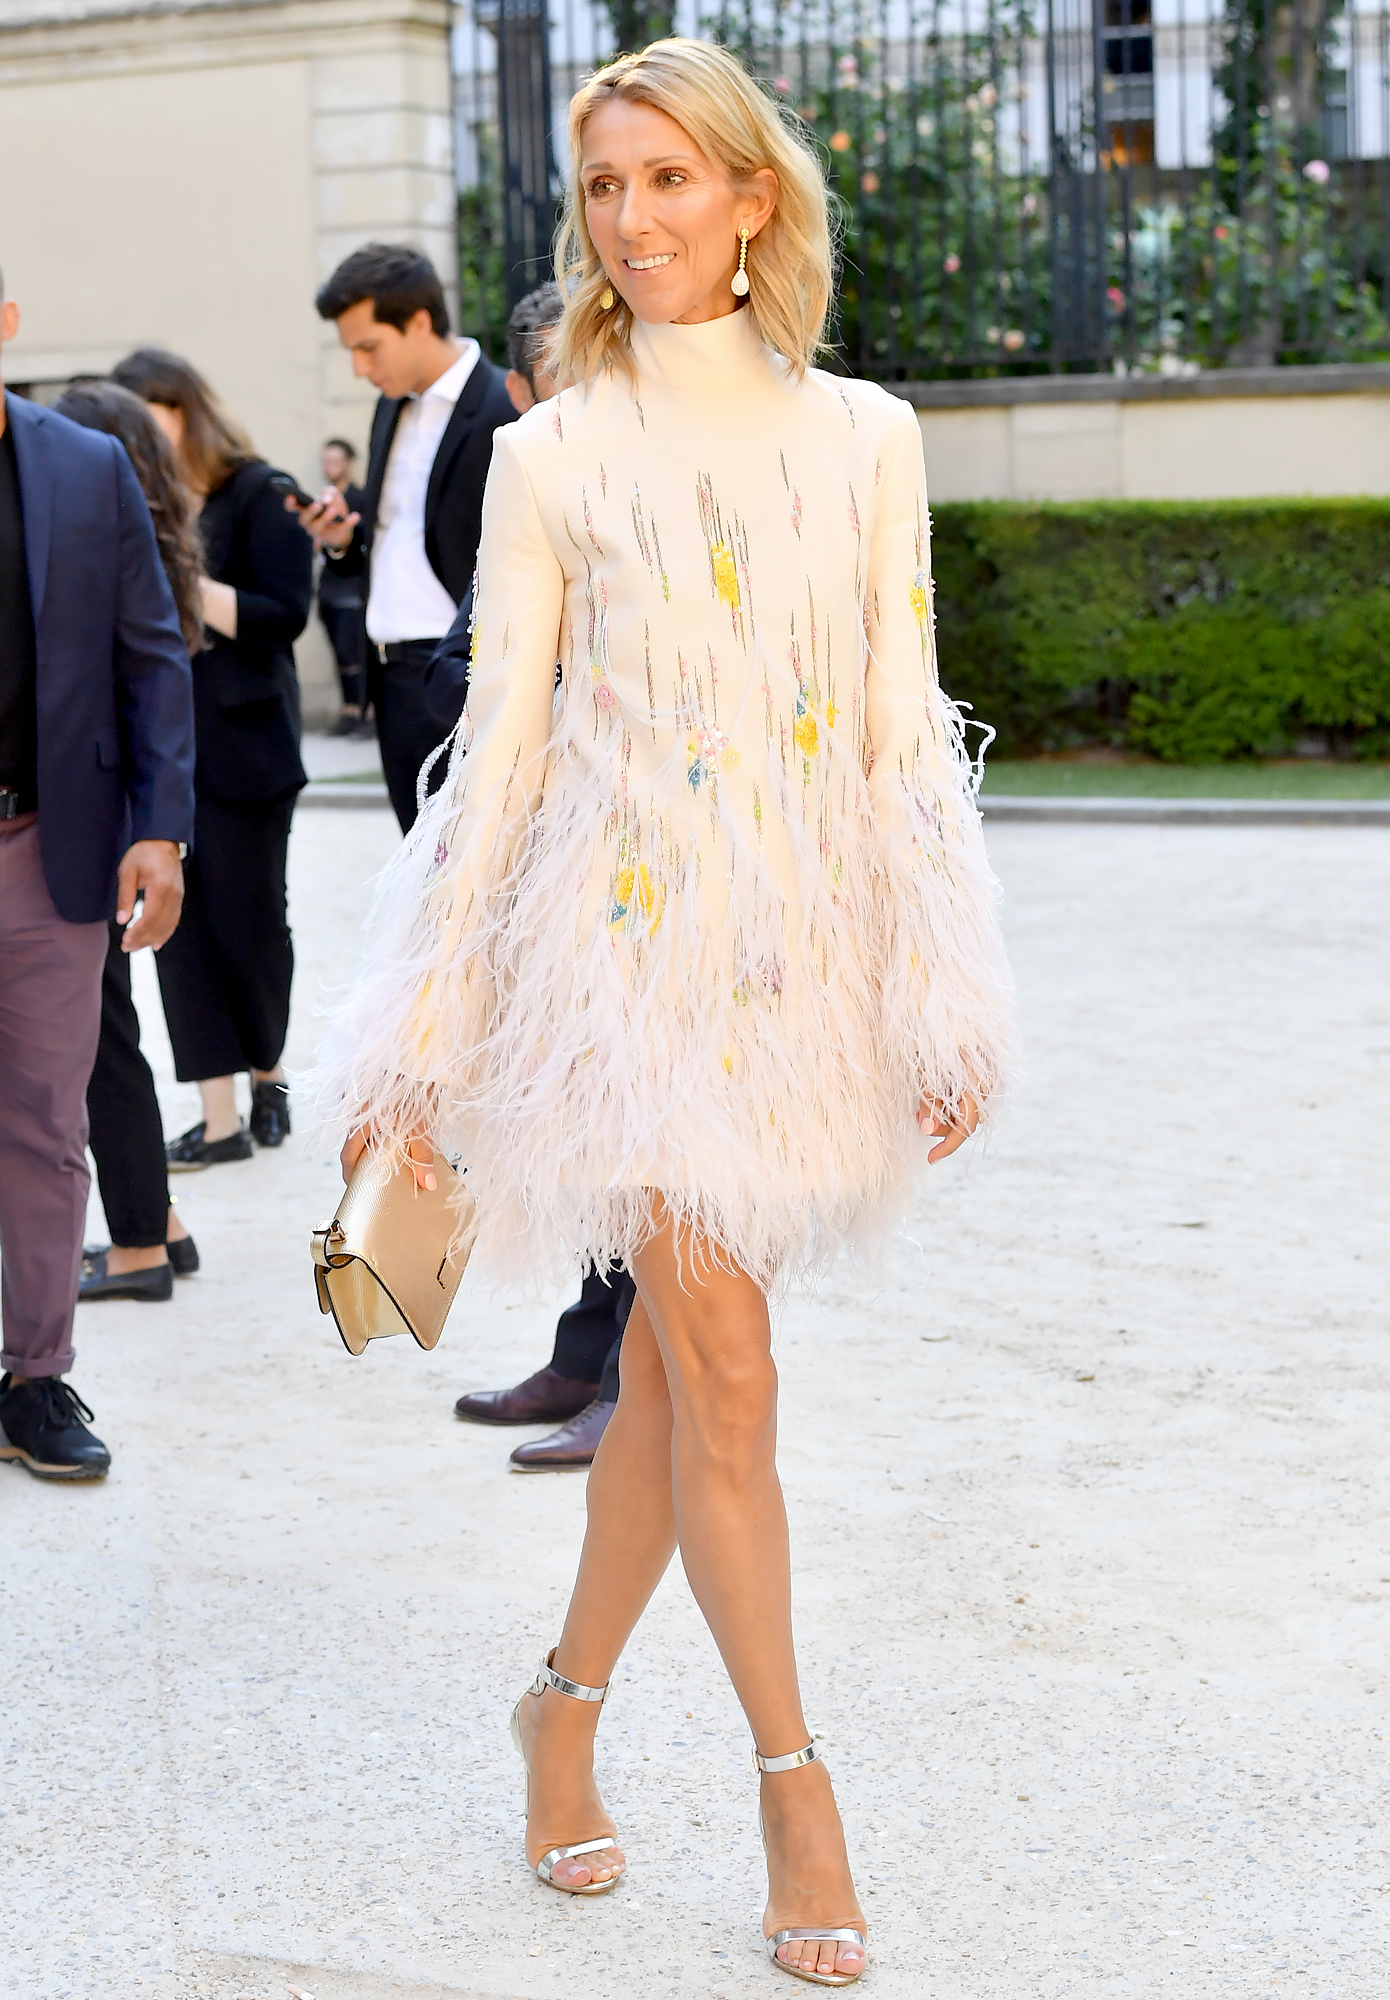 We Need to Talk About Céline Dion's Haute Couture Fashion Week Outfits